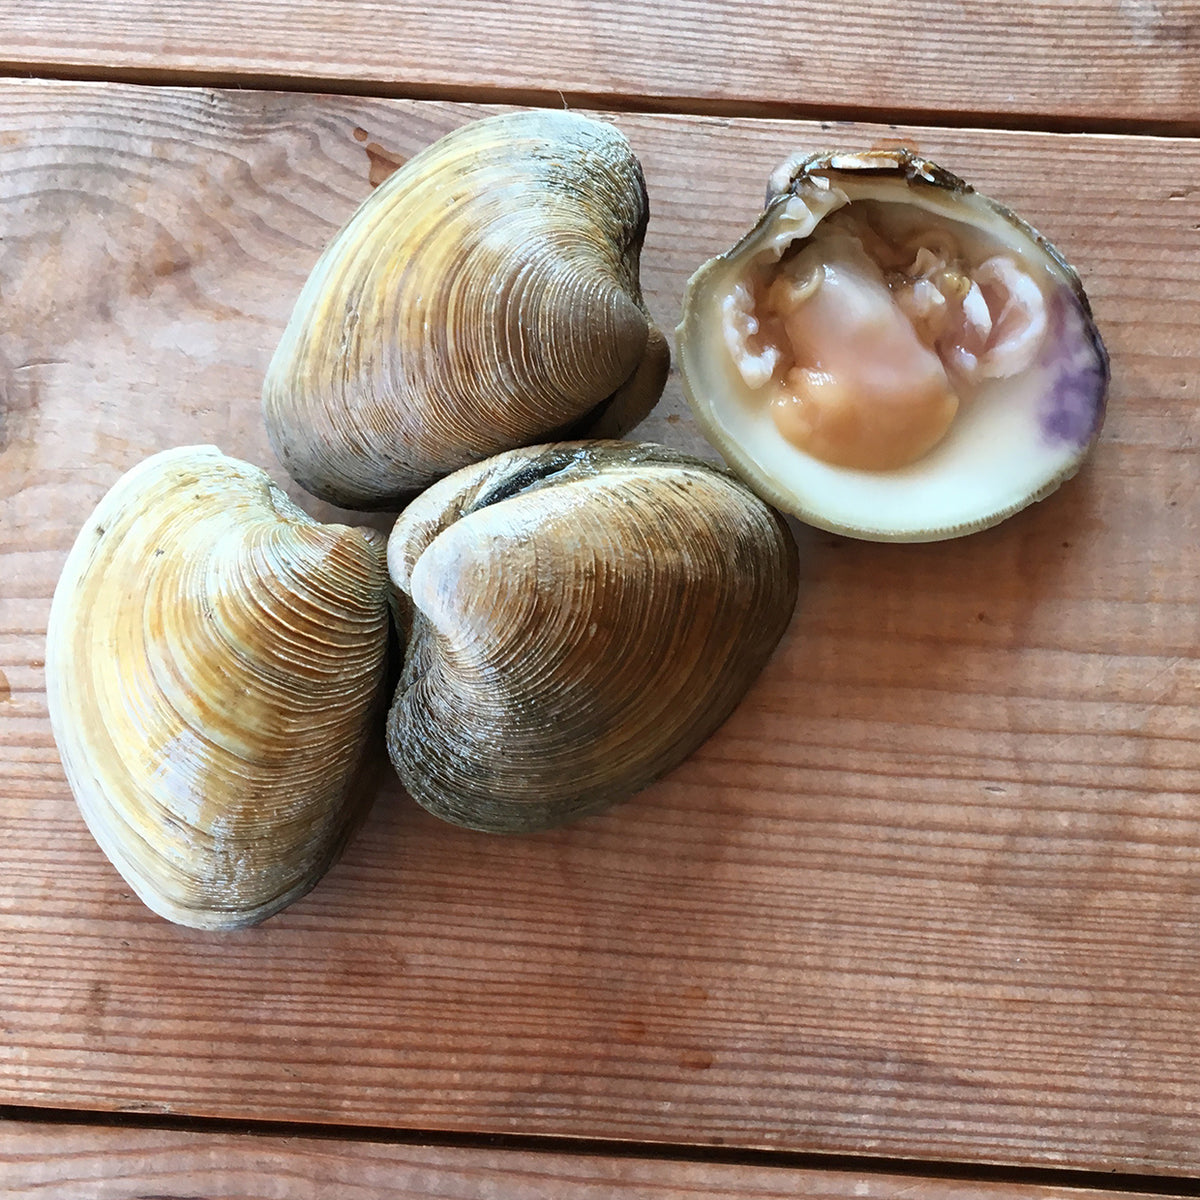 Hard Shell Clams – Colchester Oyster Fishery